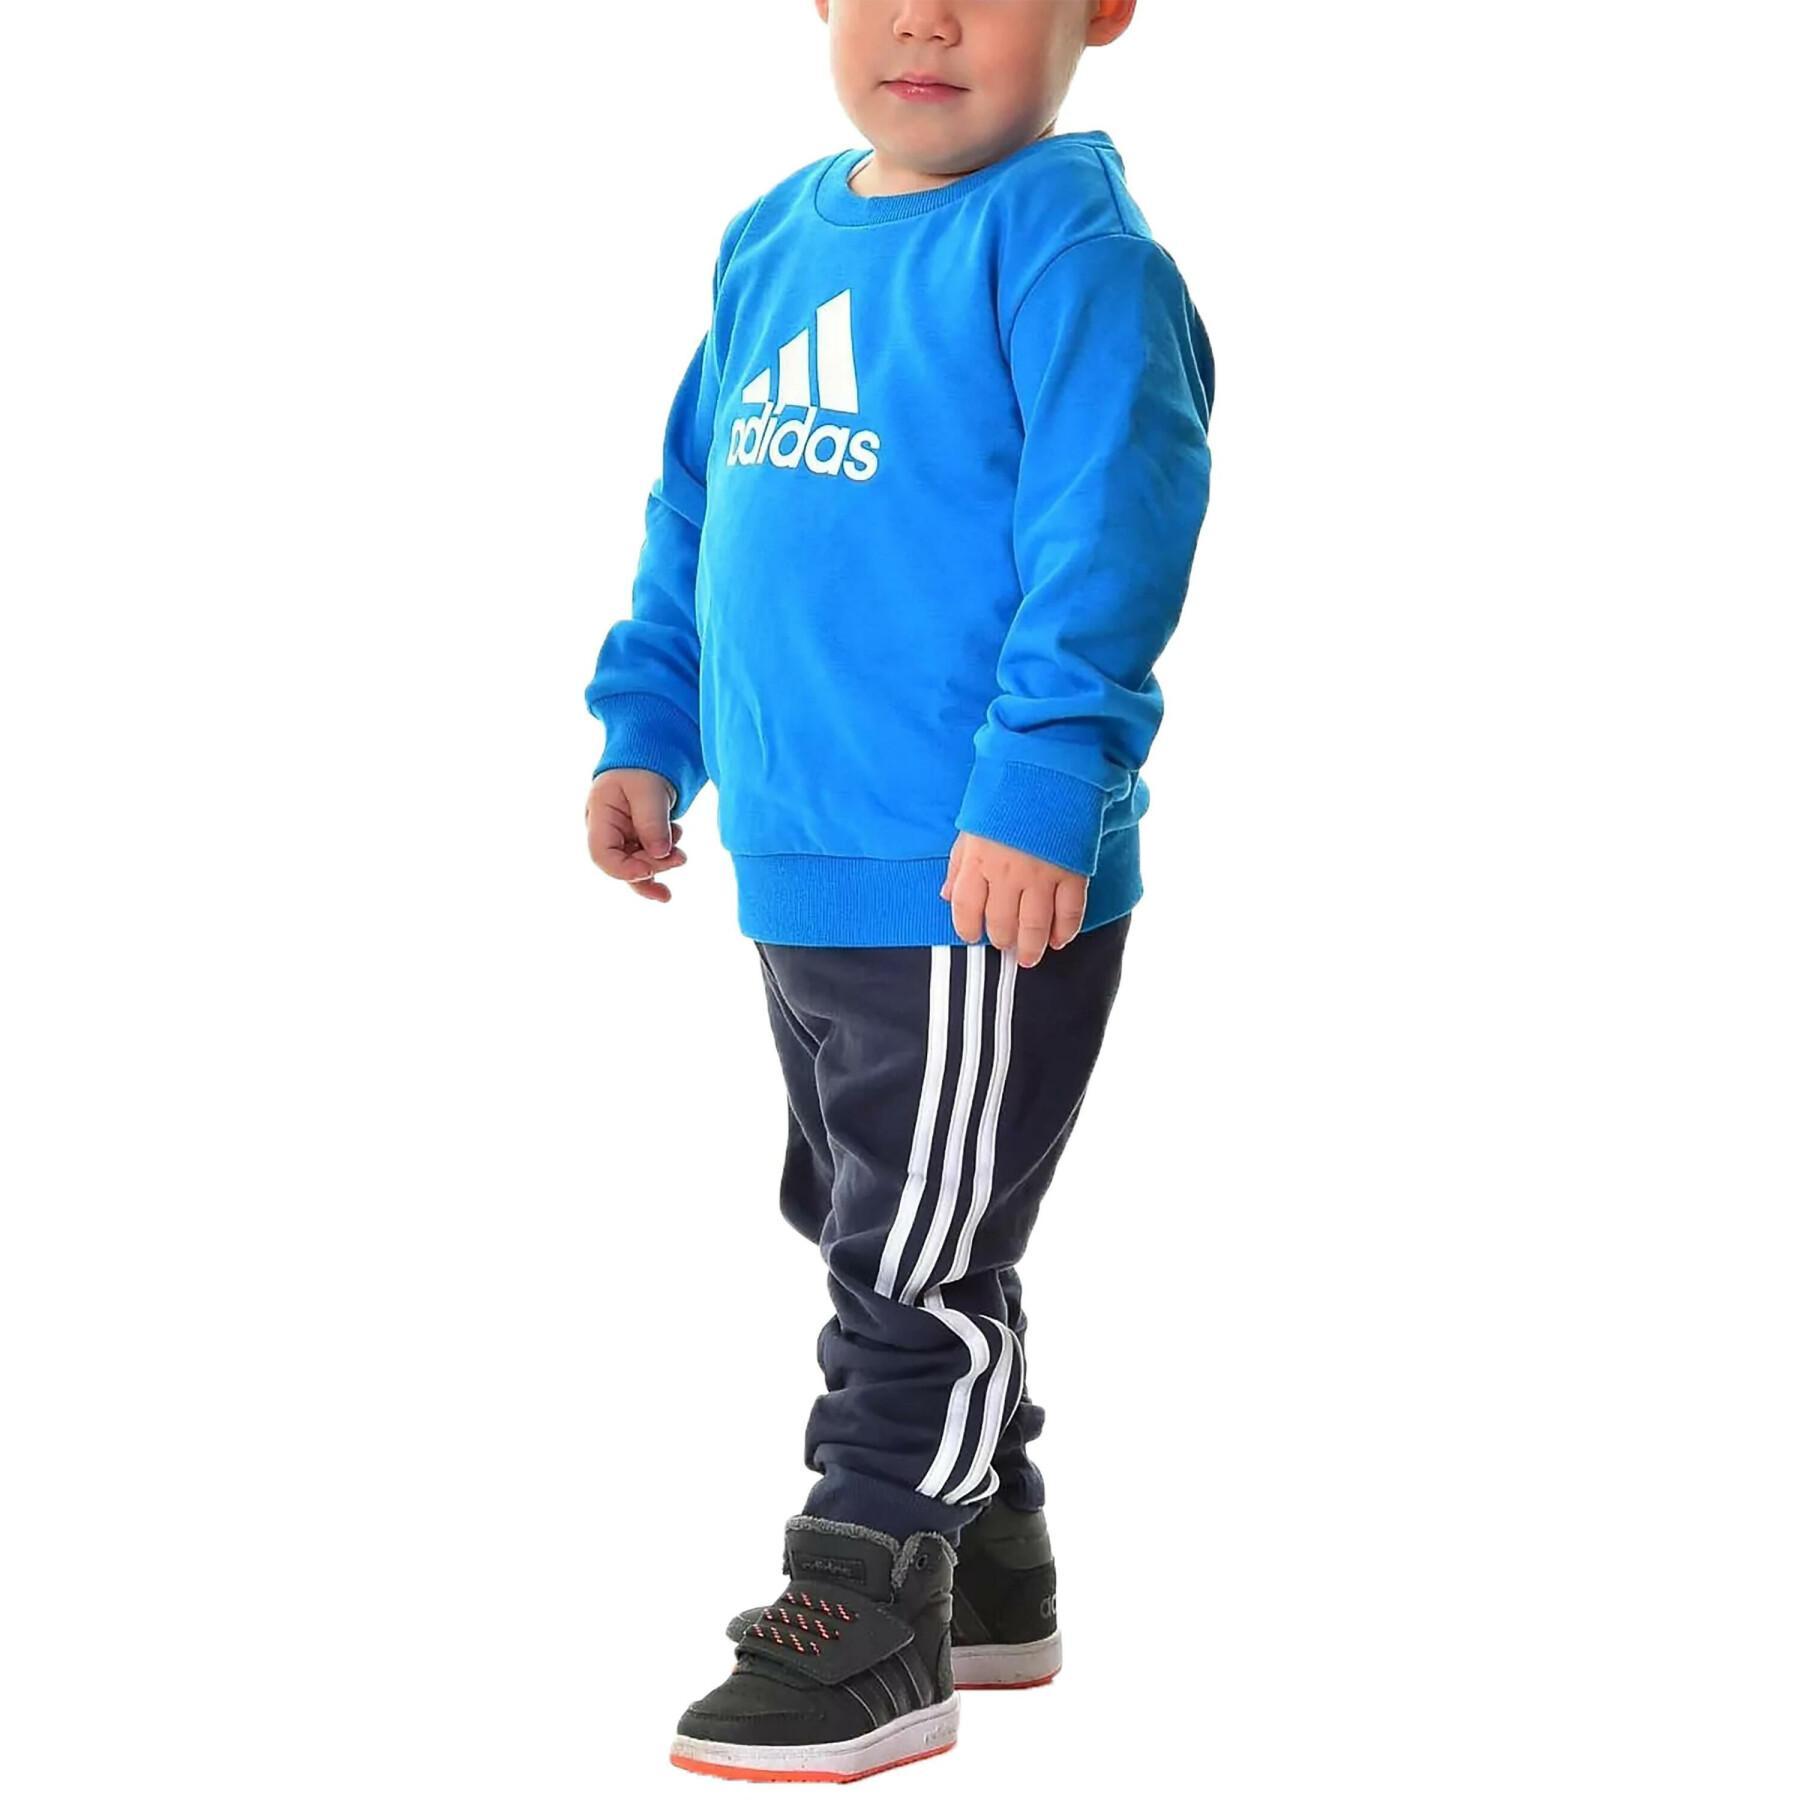 Children's tracksuit adidas Badge of Sport French Terry